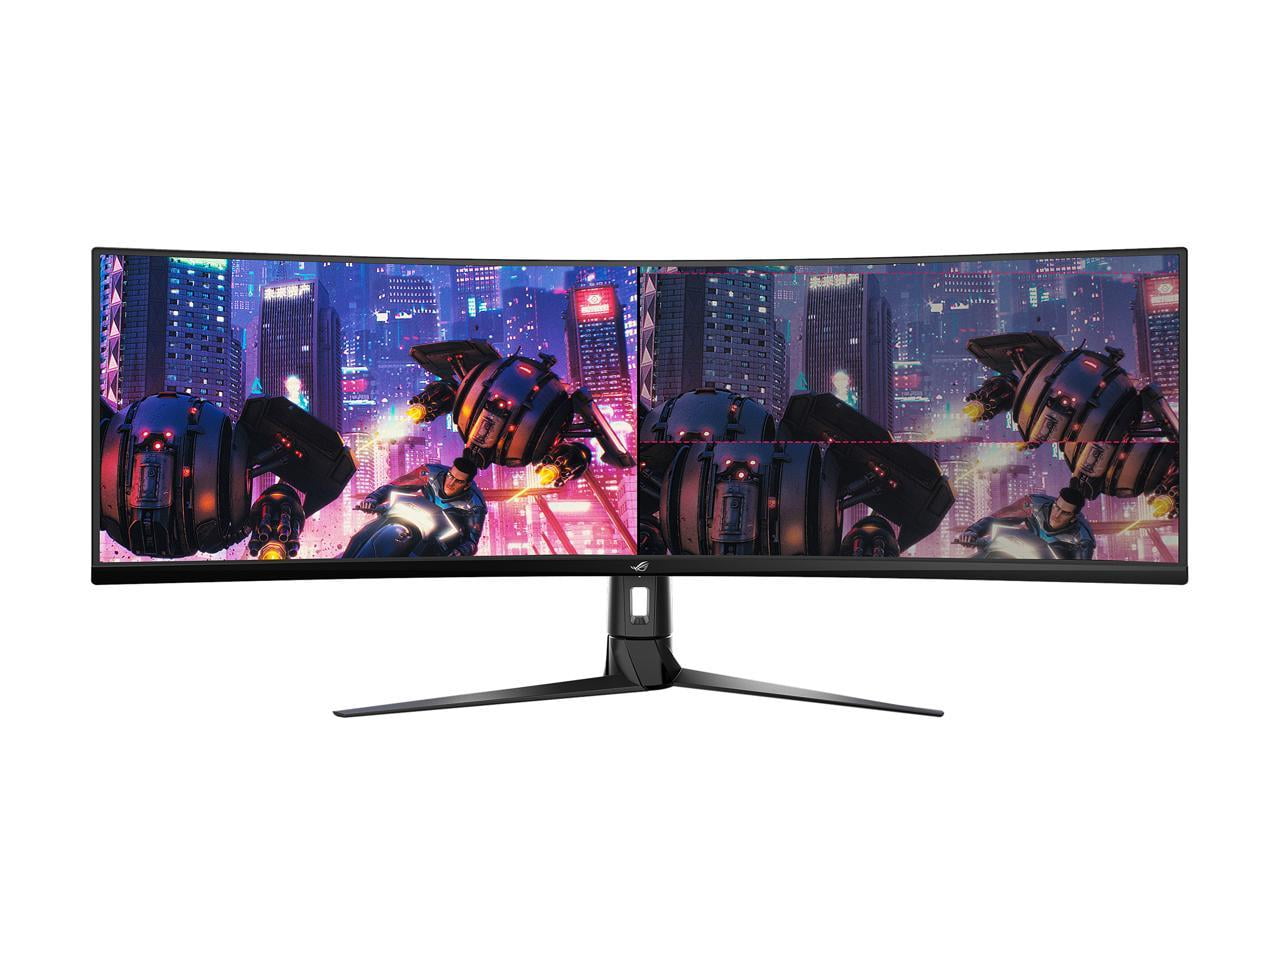 Strix 400, DP Curved Care HDR HDMI DisplayHDR with 49\